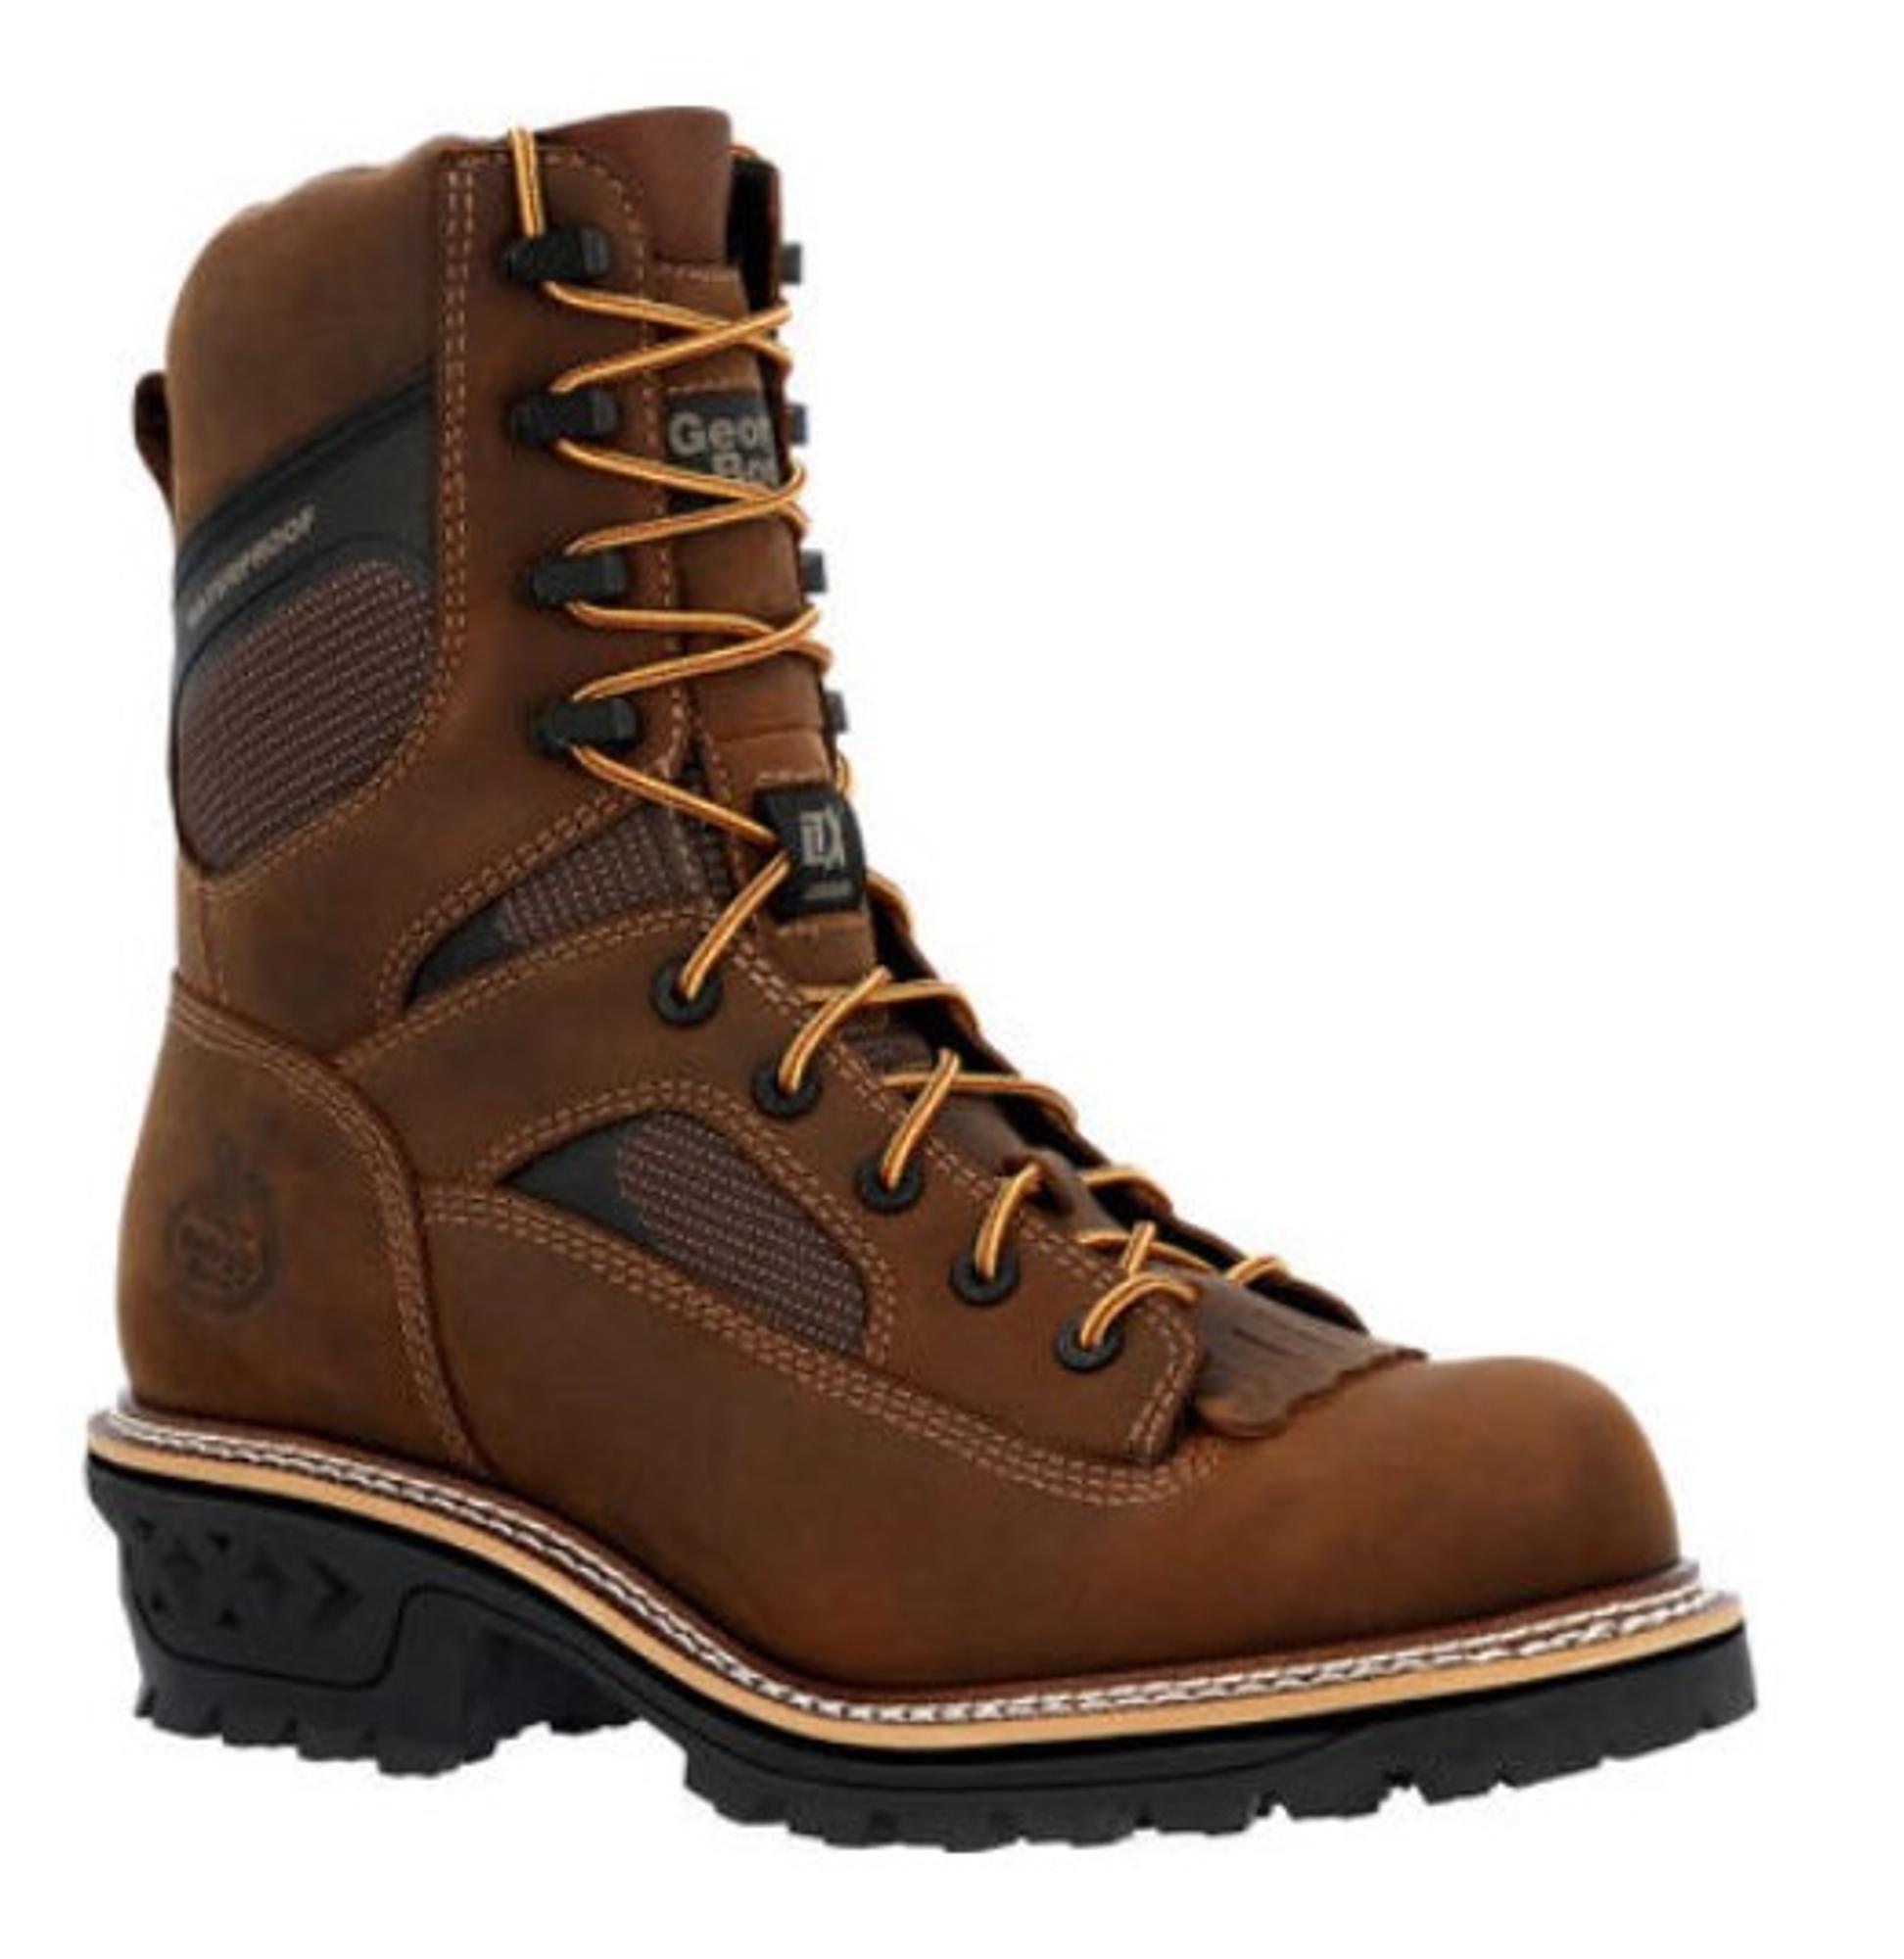 Ltx Logger Composite Toe Lace Up Work Boots